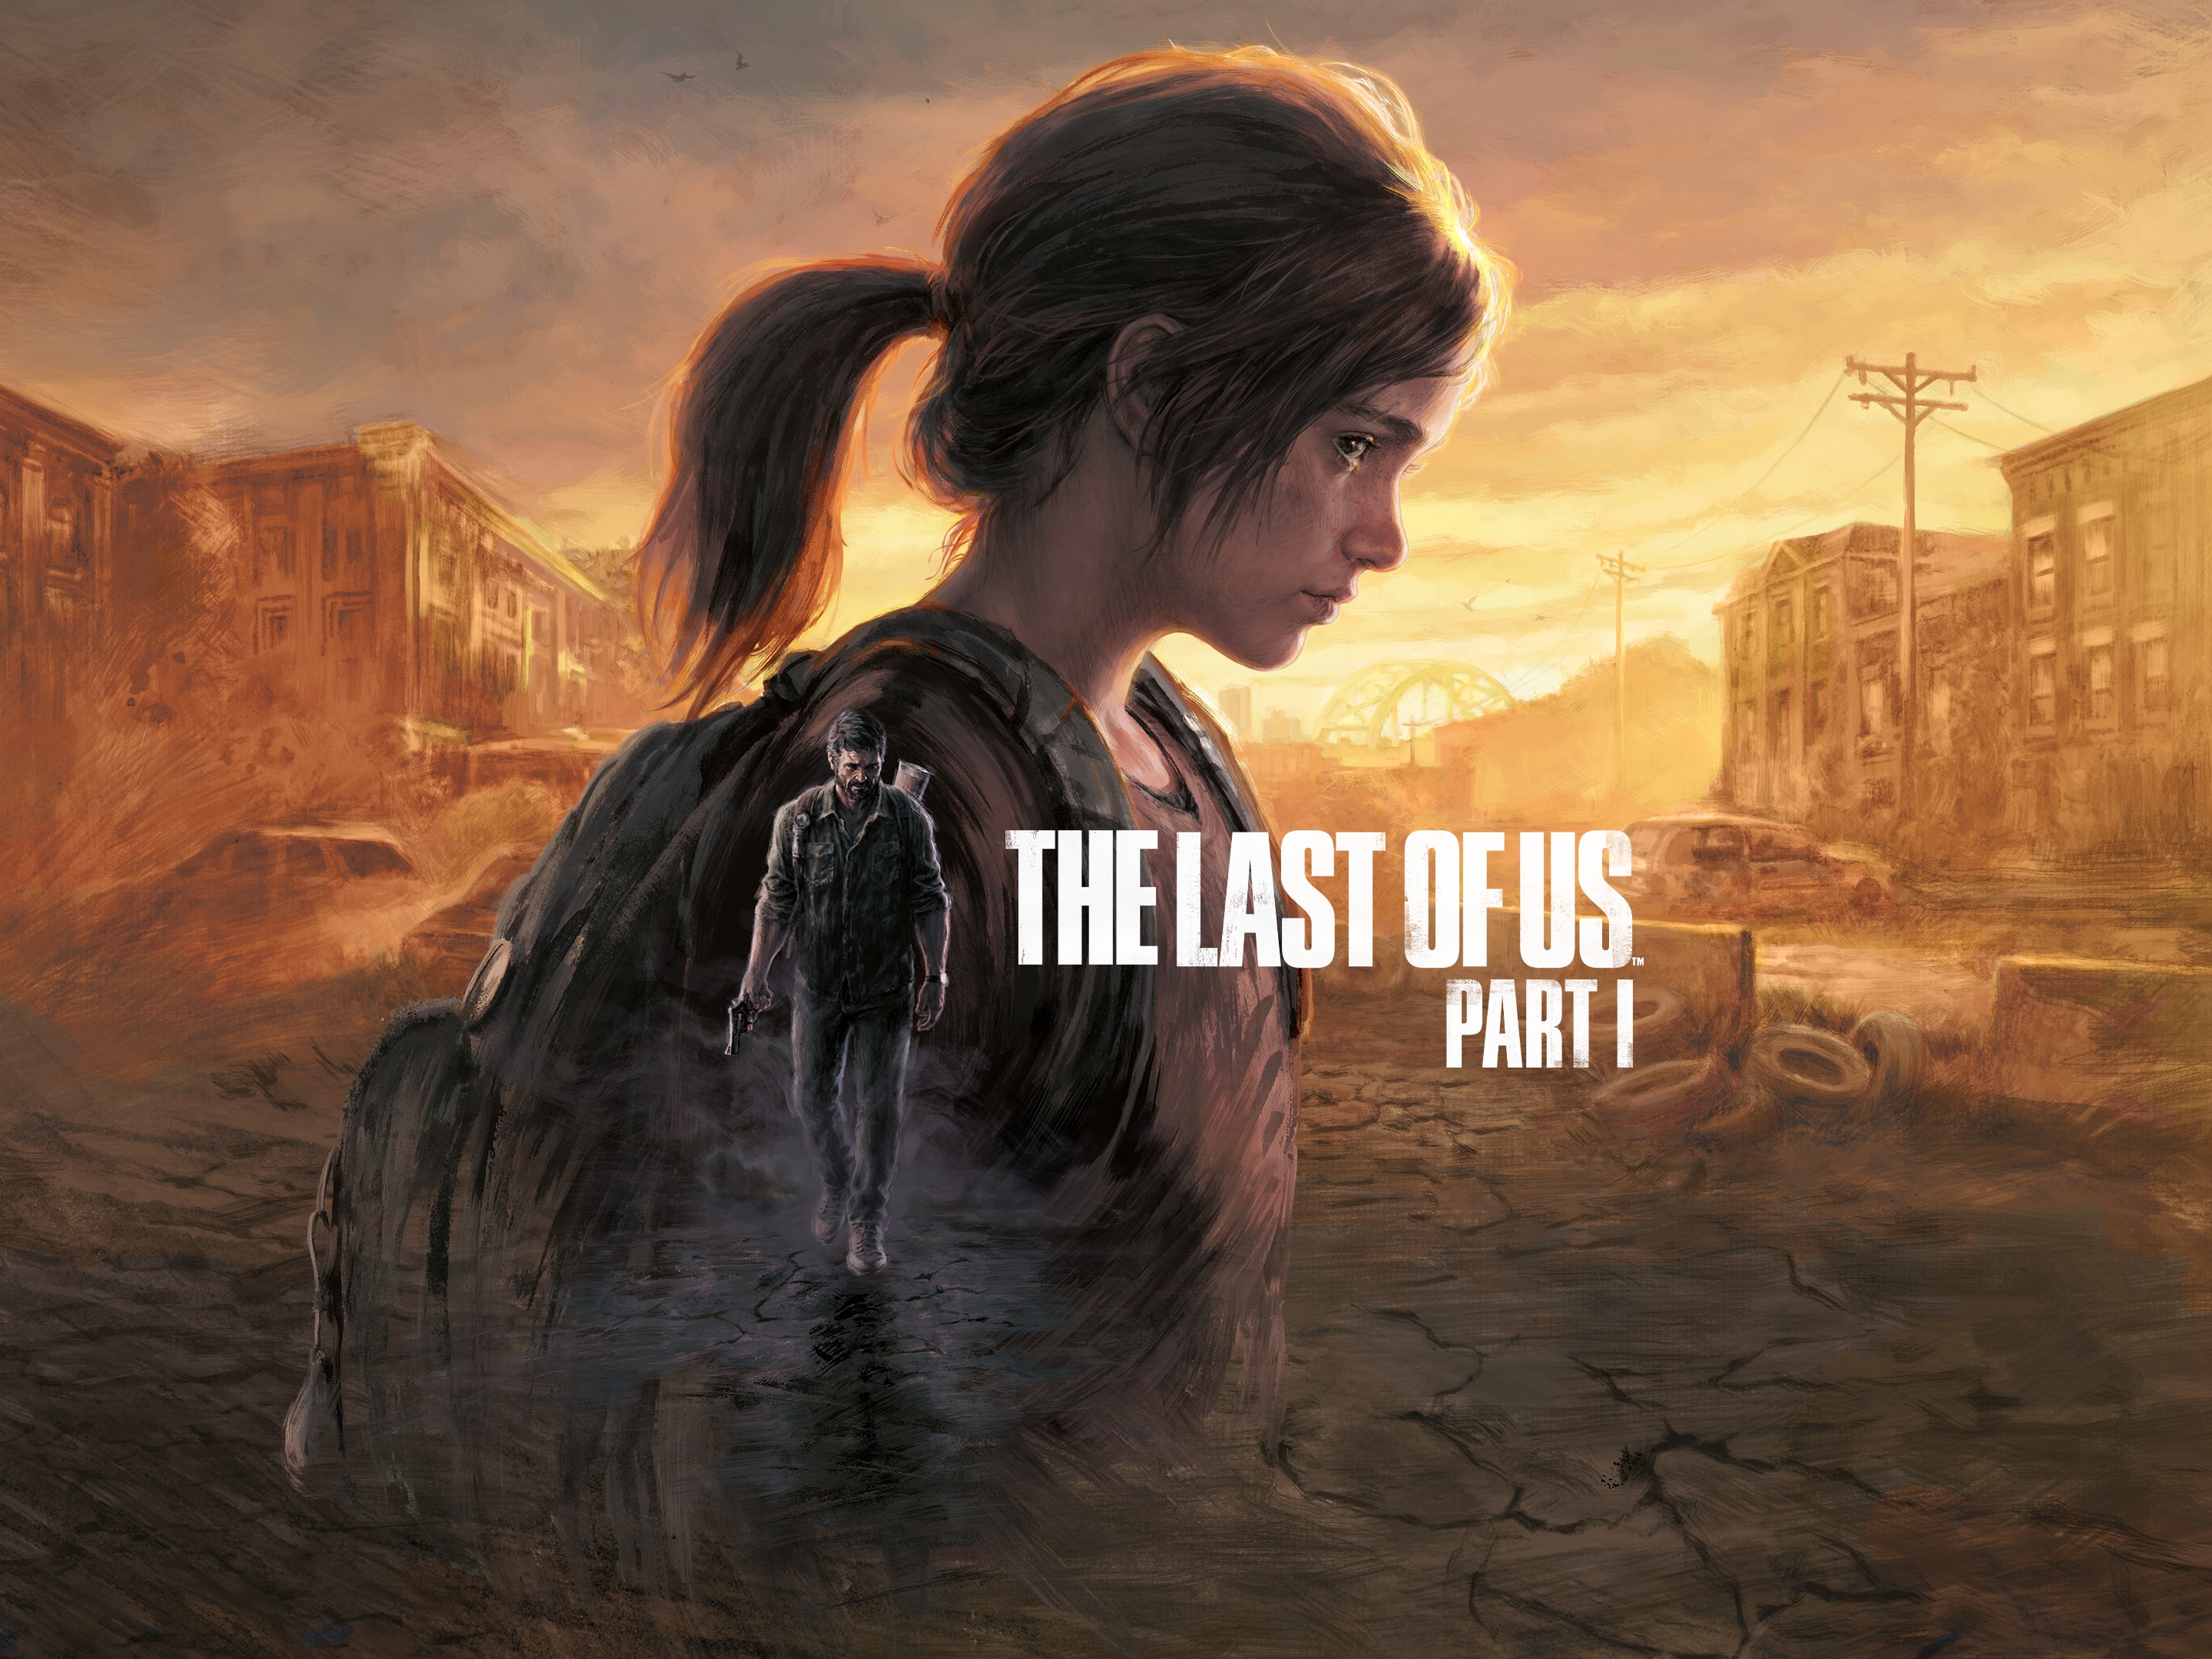 The Last Of Us: Escape The Dark announced by Naughty Dog